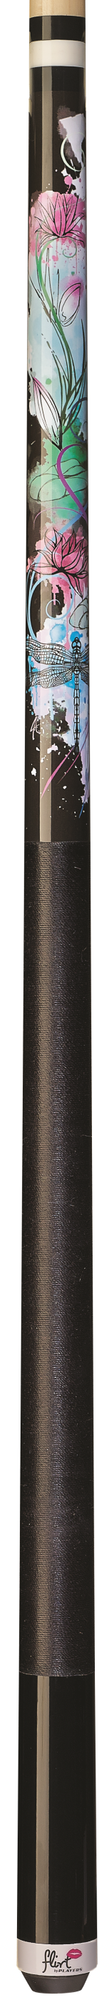 Players Players F-2605 Pool Cue Pool Cue